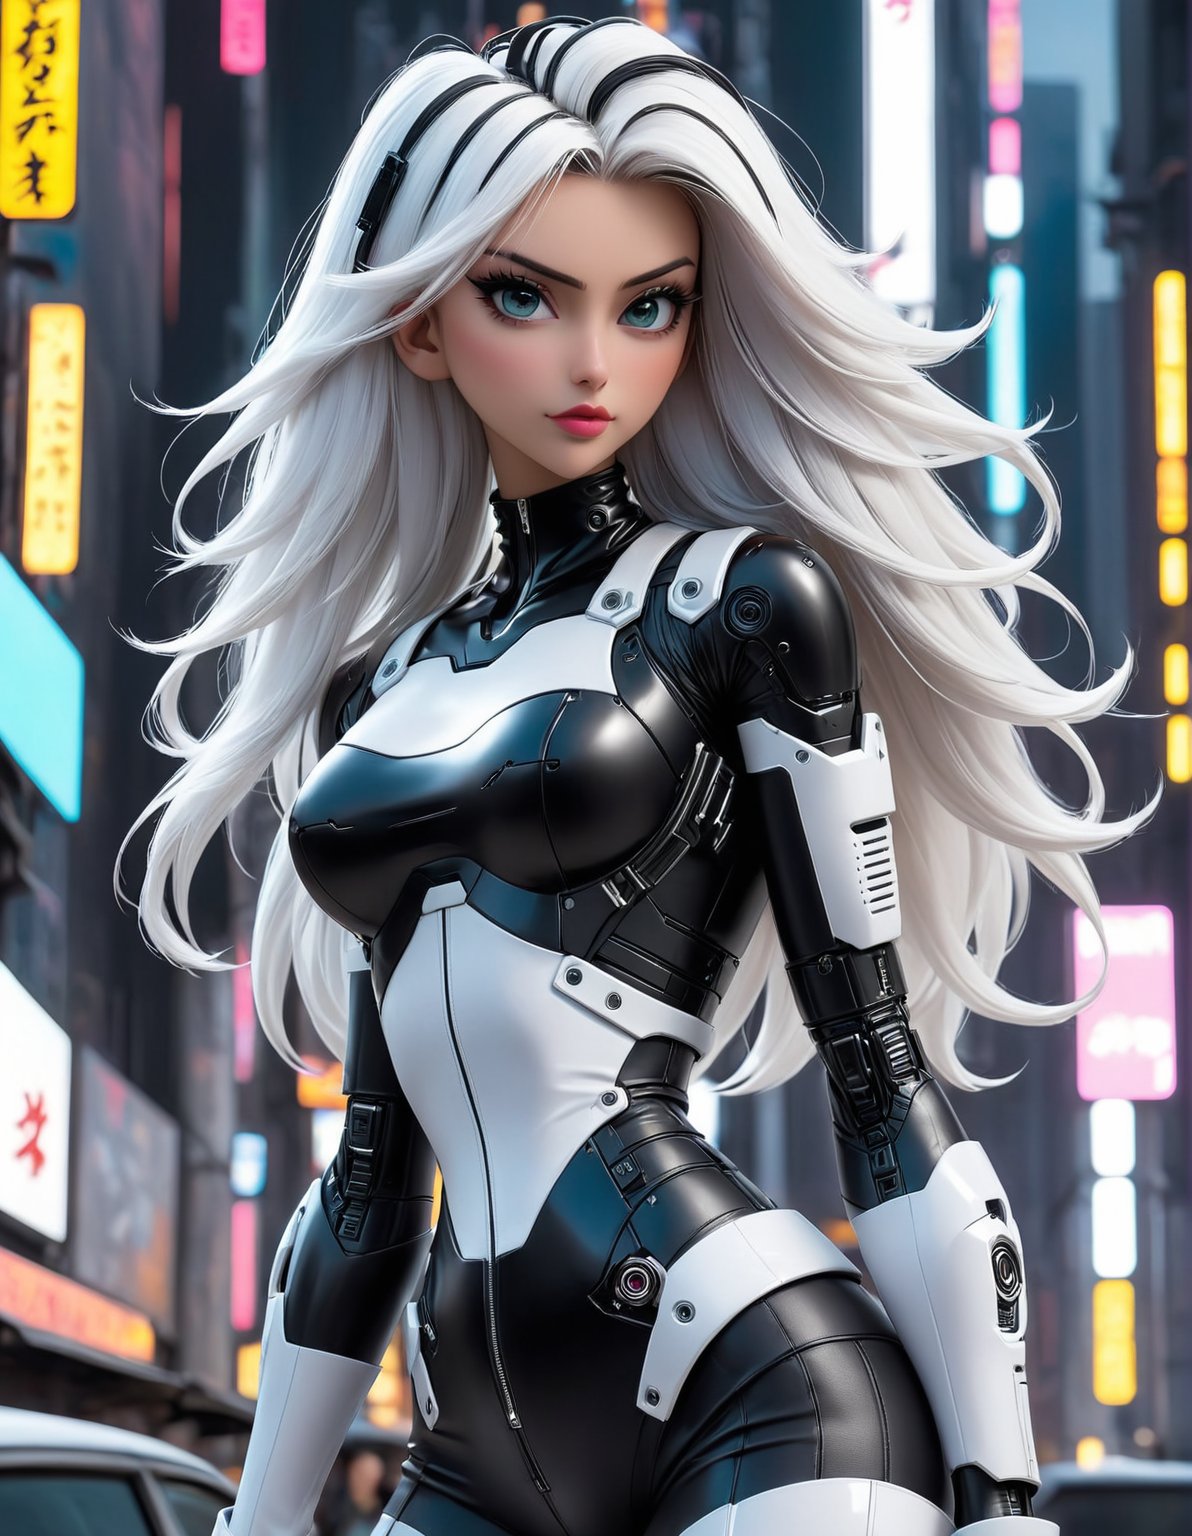 a woman in a black and white outfit standing in a city, digital cyberpunk - anime art, digital cyberpunk anime art, anime cyberpunk art, cyberpunk anime art, oppai cyberpunk, cyberpunk anime girl, female cyberpunk anime girl, modern cyberpunk anime, cyberpunk anime girl mech, best anime 4k konachan wallpaper, anime cyberpunk, cyberpunk art style